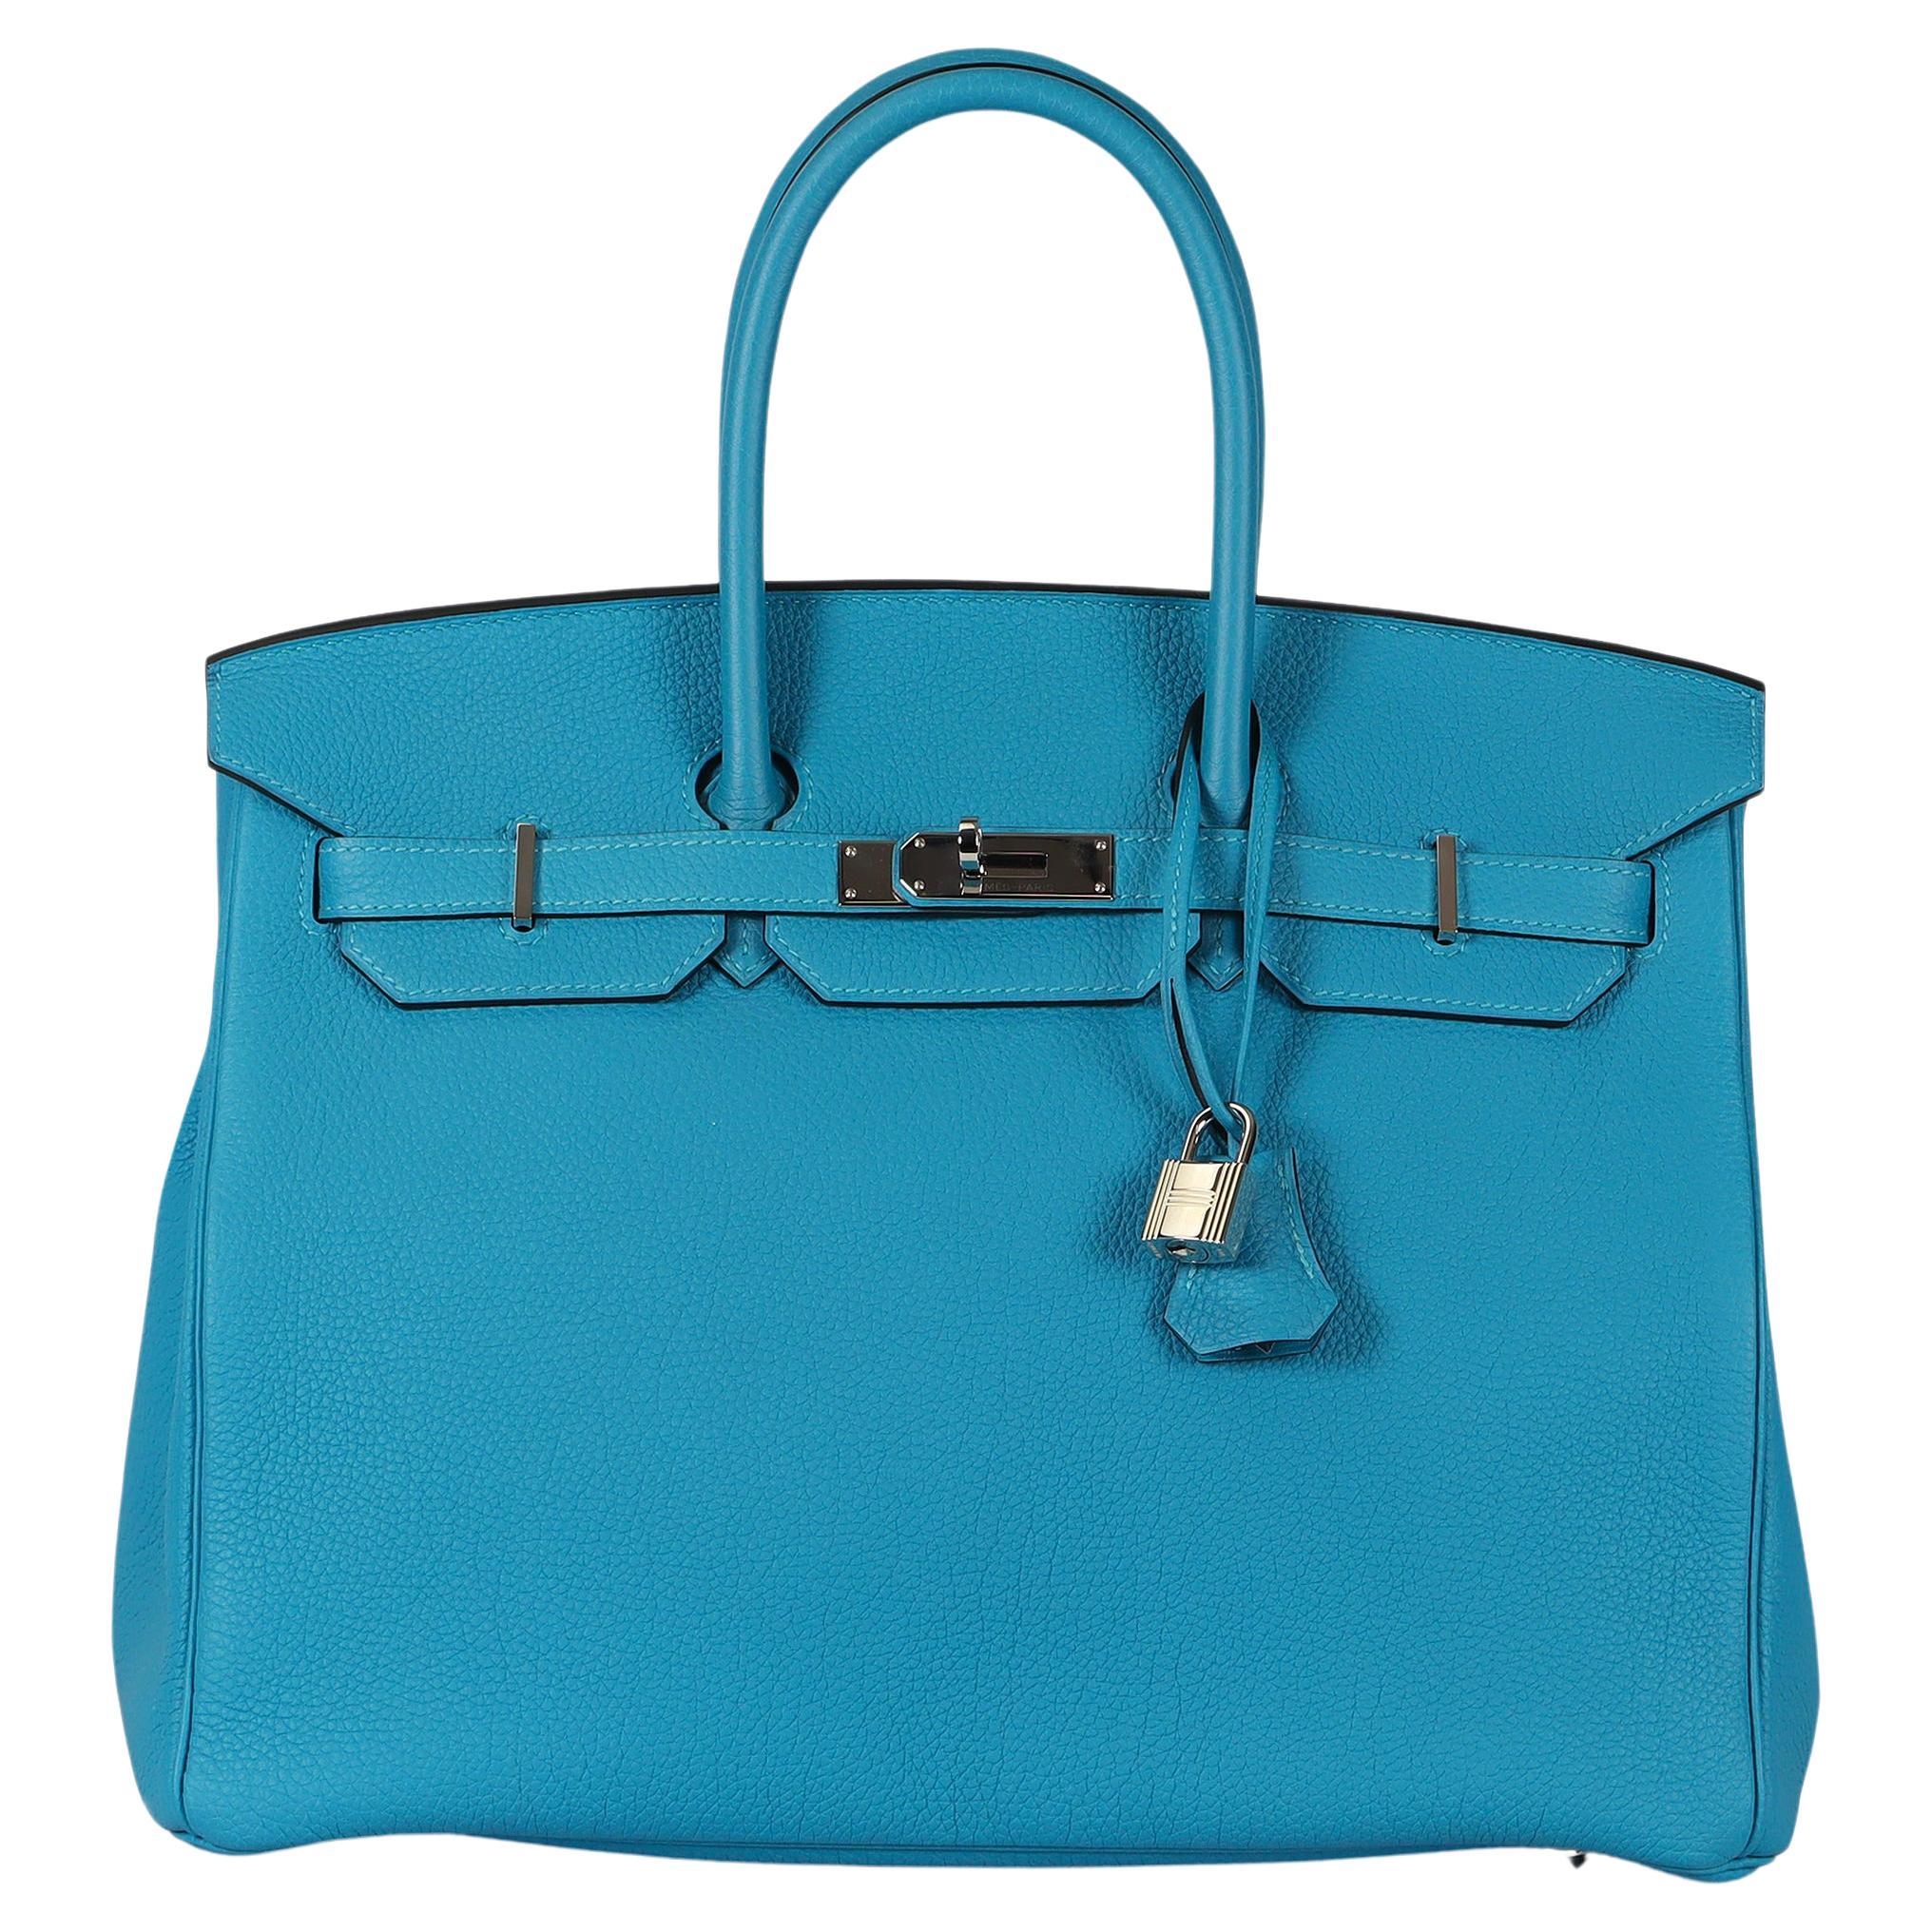 Can you walk into Hermes and buy a Birkin?